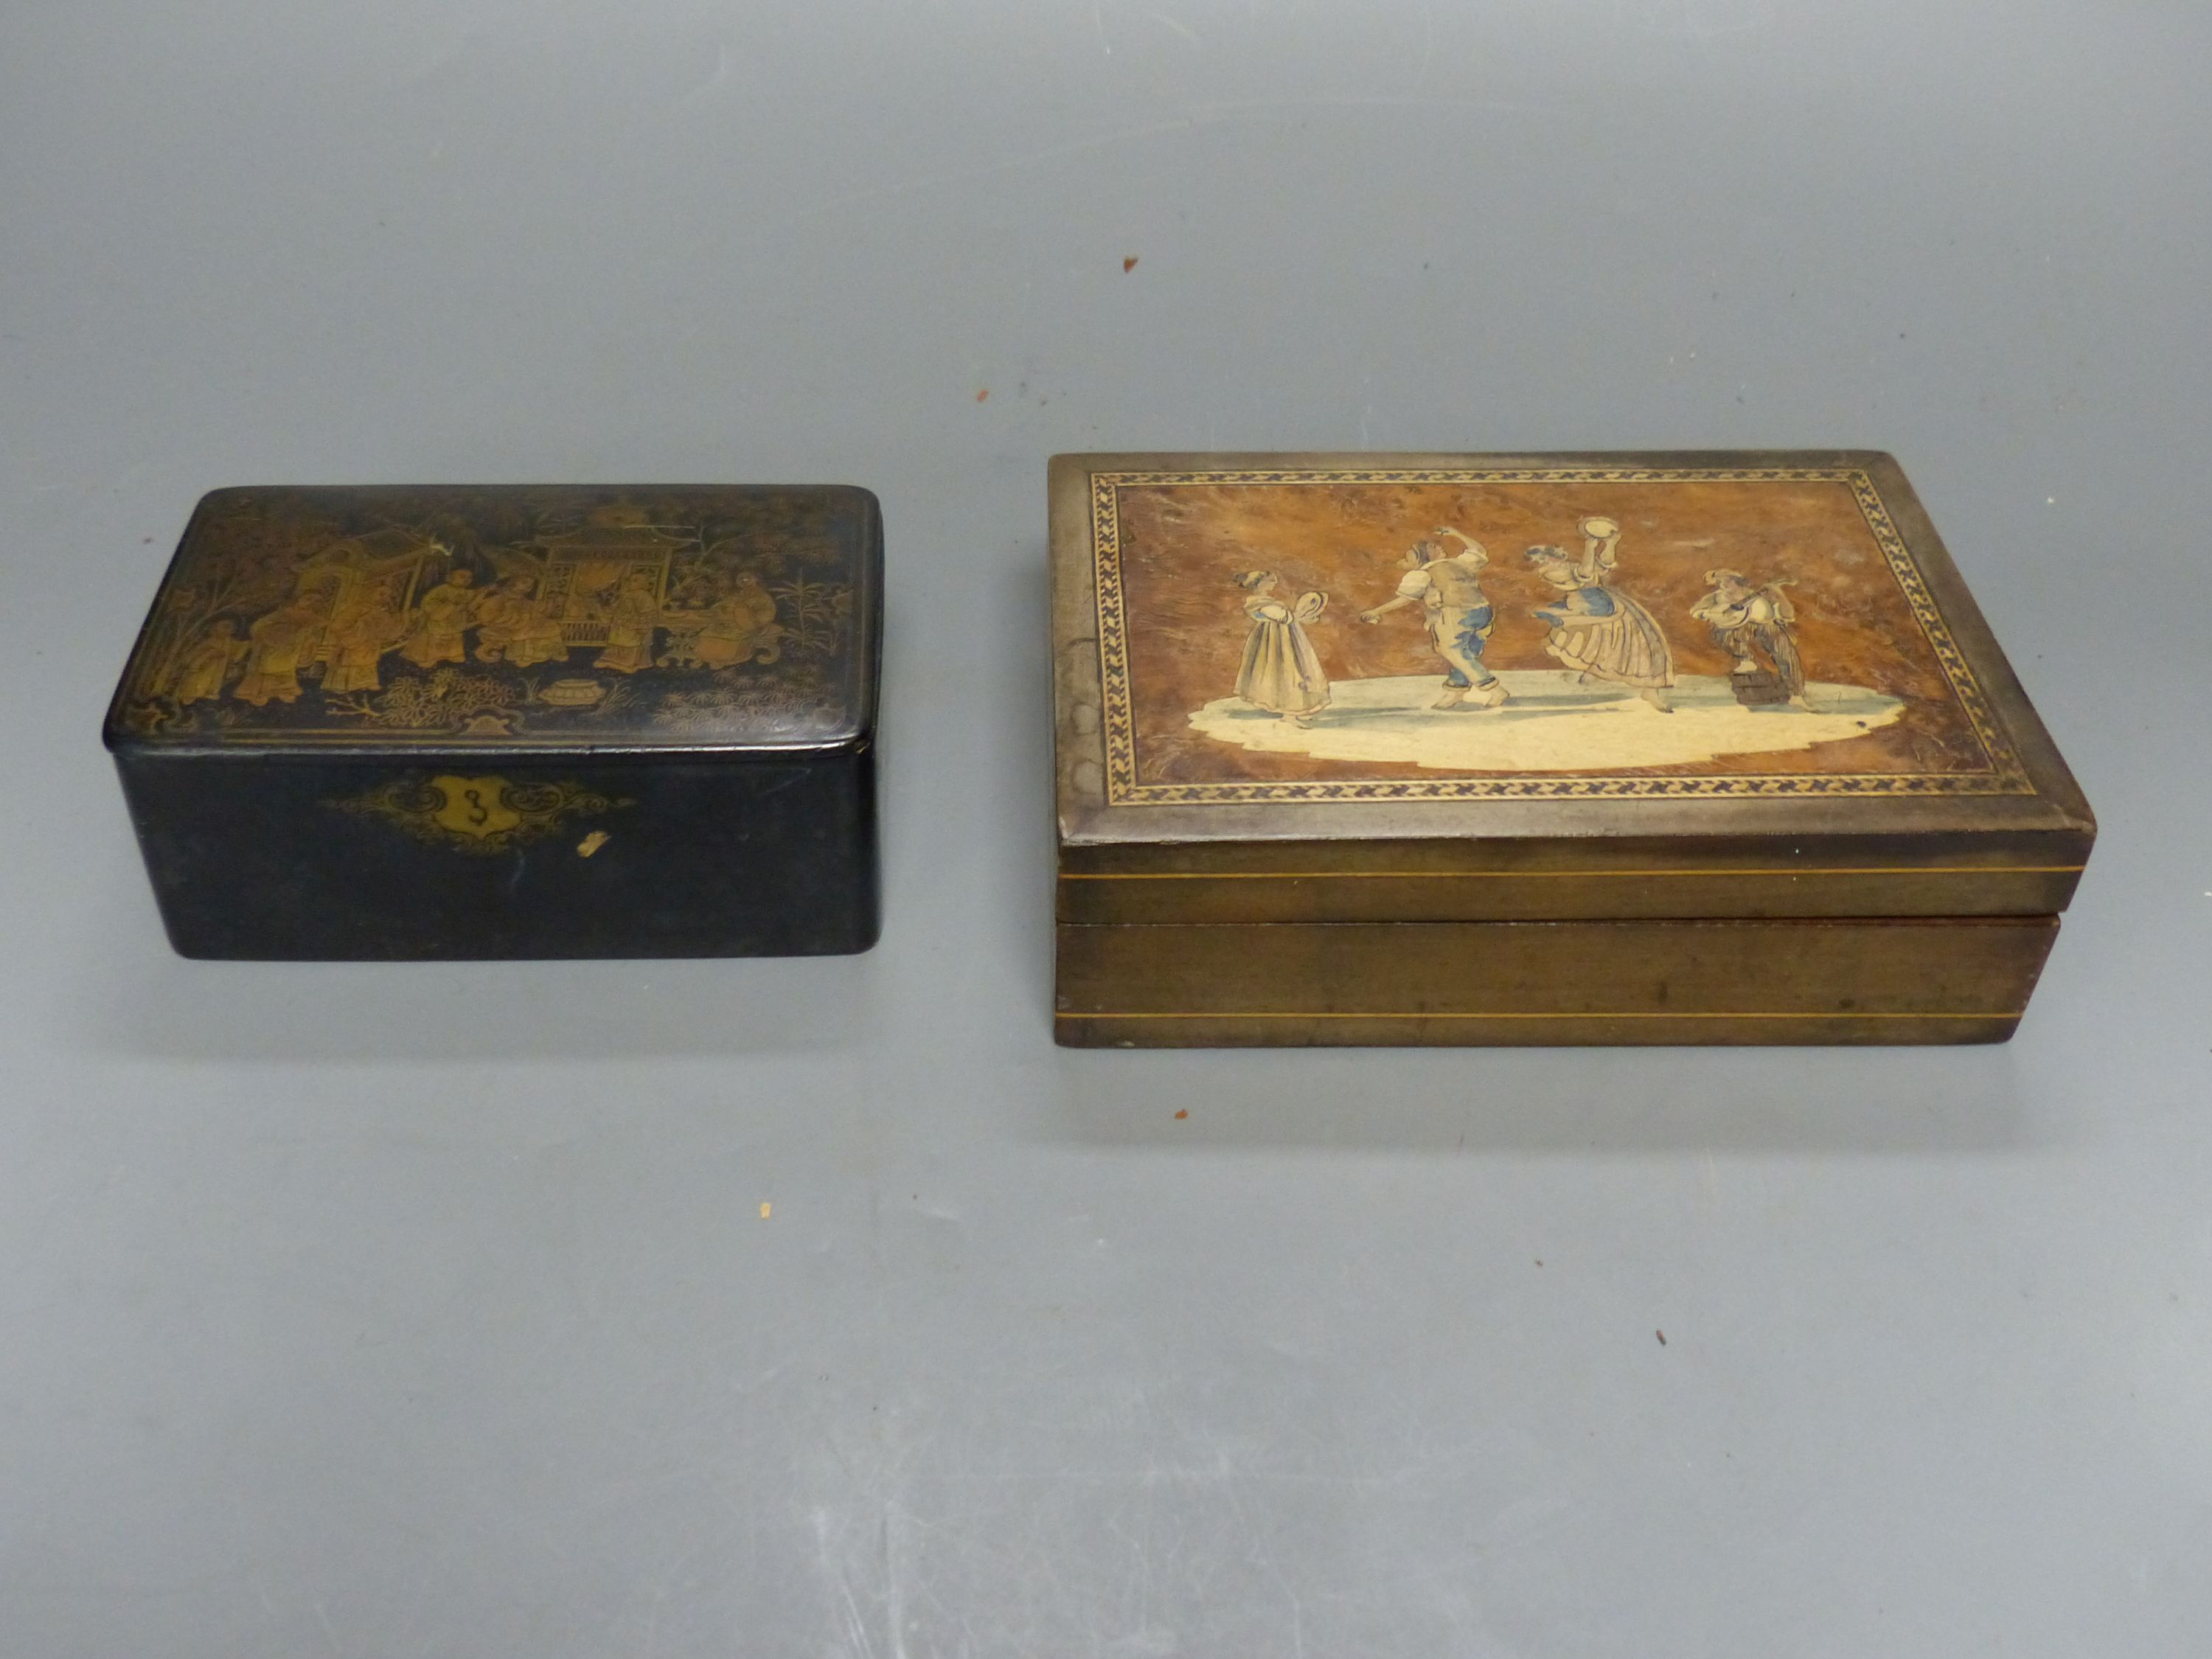 A mother of pearl inlaid lacquer writing box, two smaller boxes and a circular tray